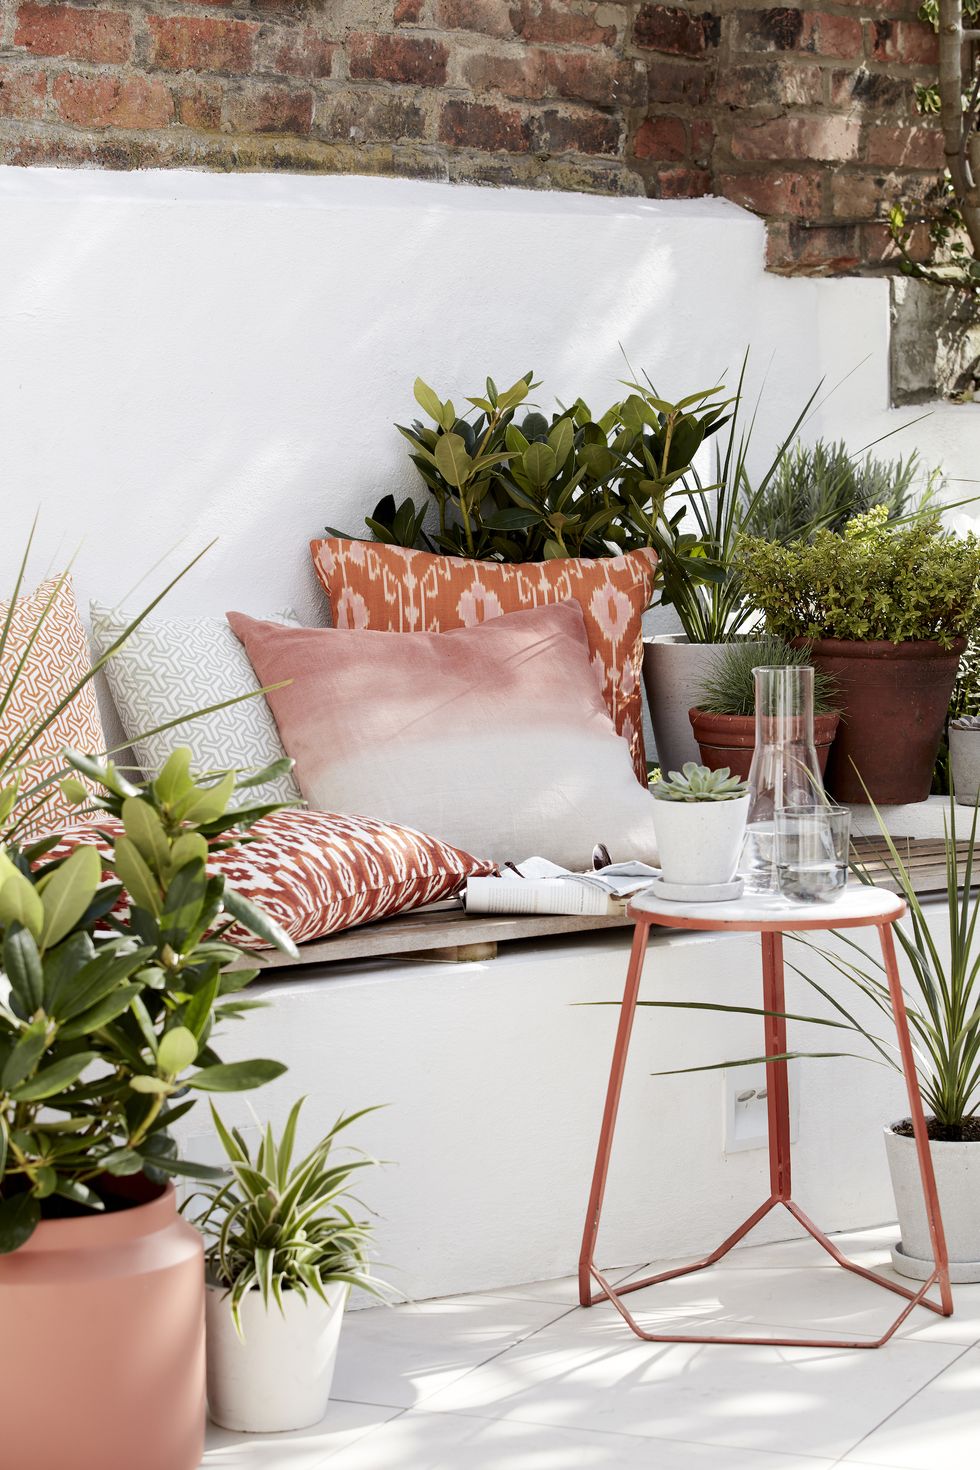 garden ideas, outdoor seating area filled with cushions, plants and a side table